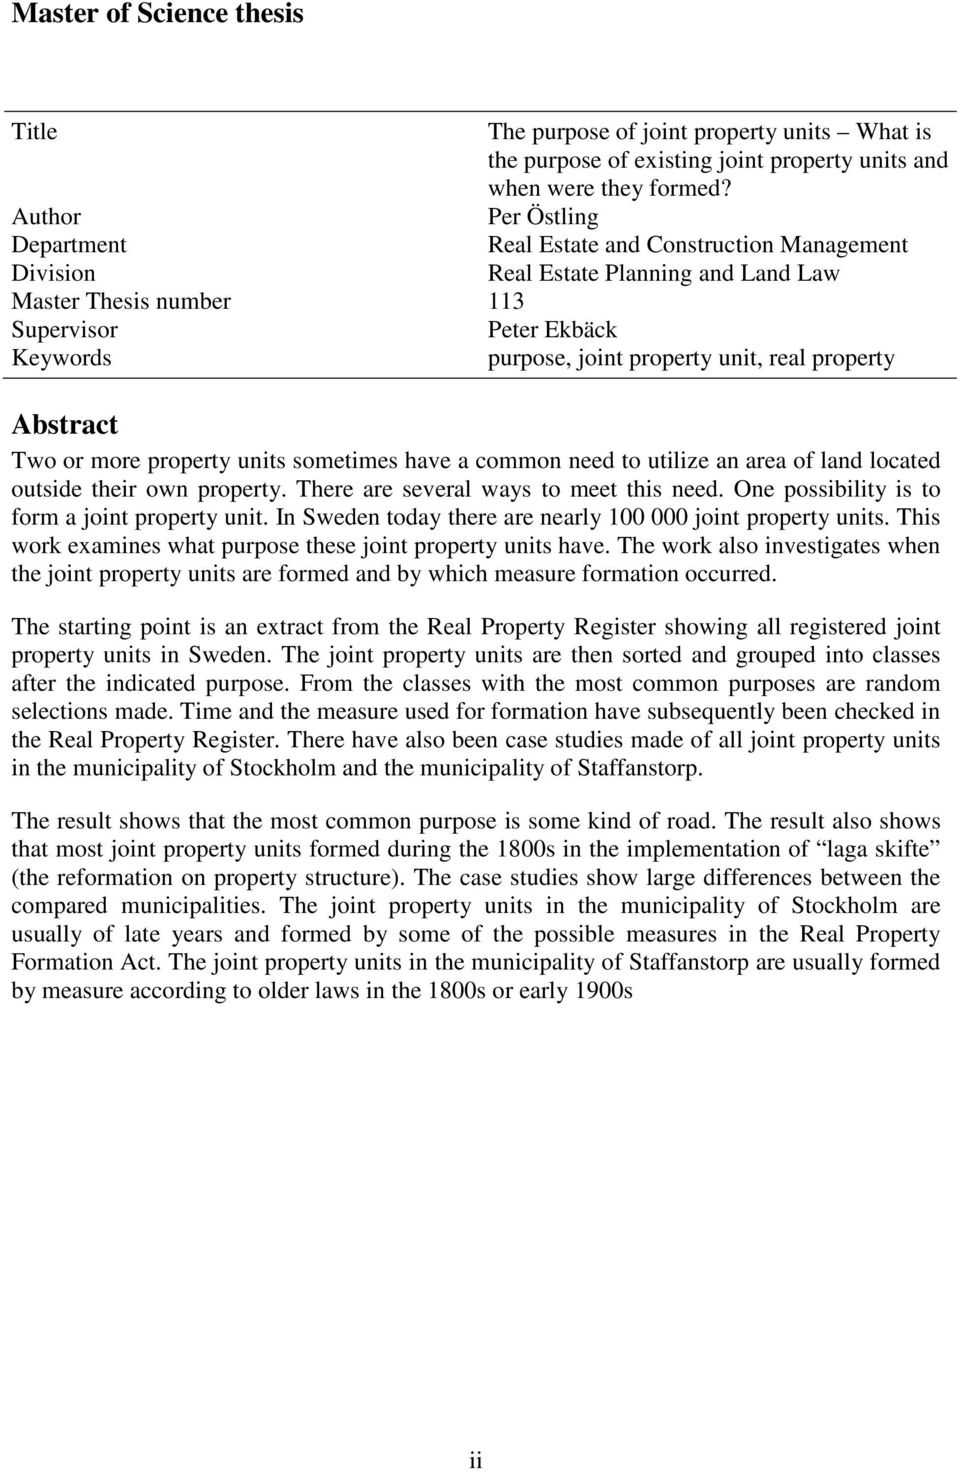 unit, real property Abstract Two or more property units sometimes have a common need to utilize an area of land located outside their own property. There are several ways to meet this need.